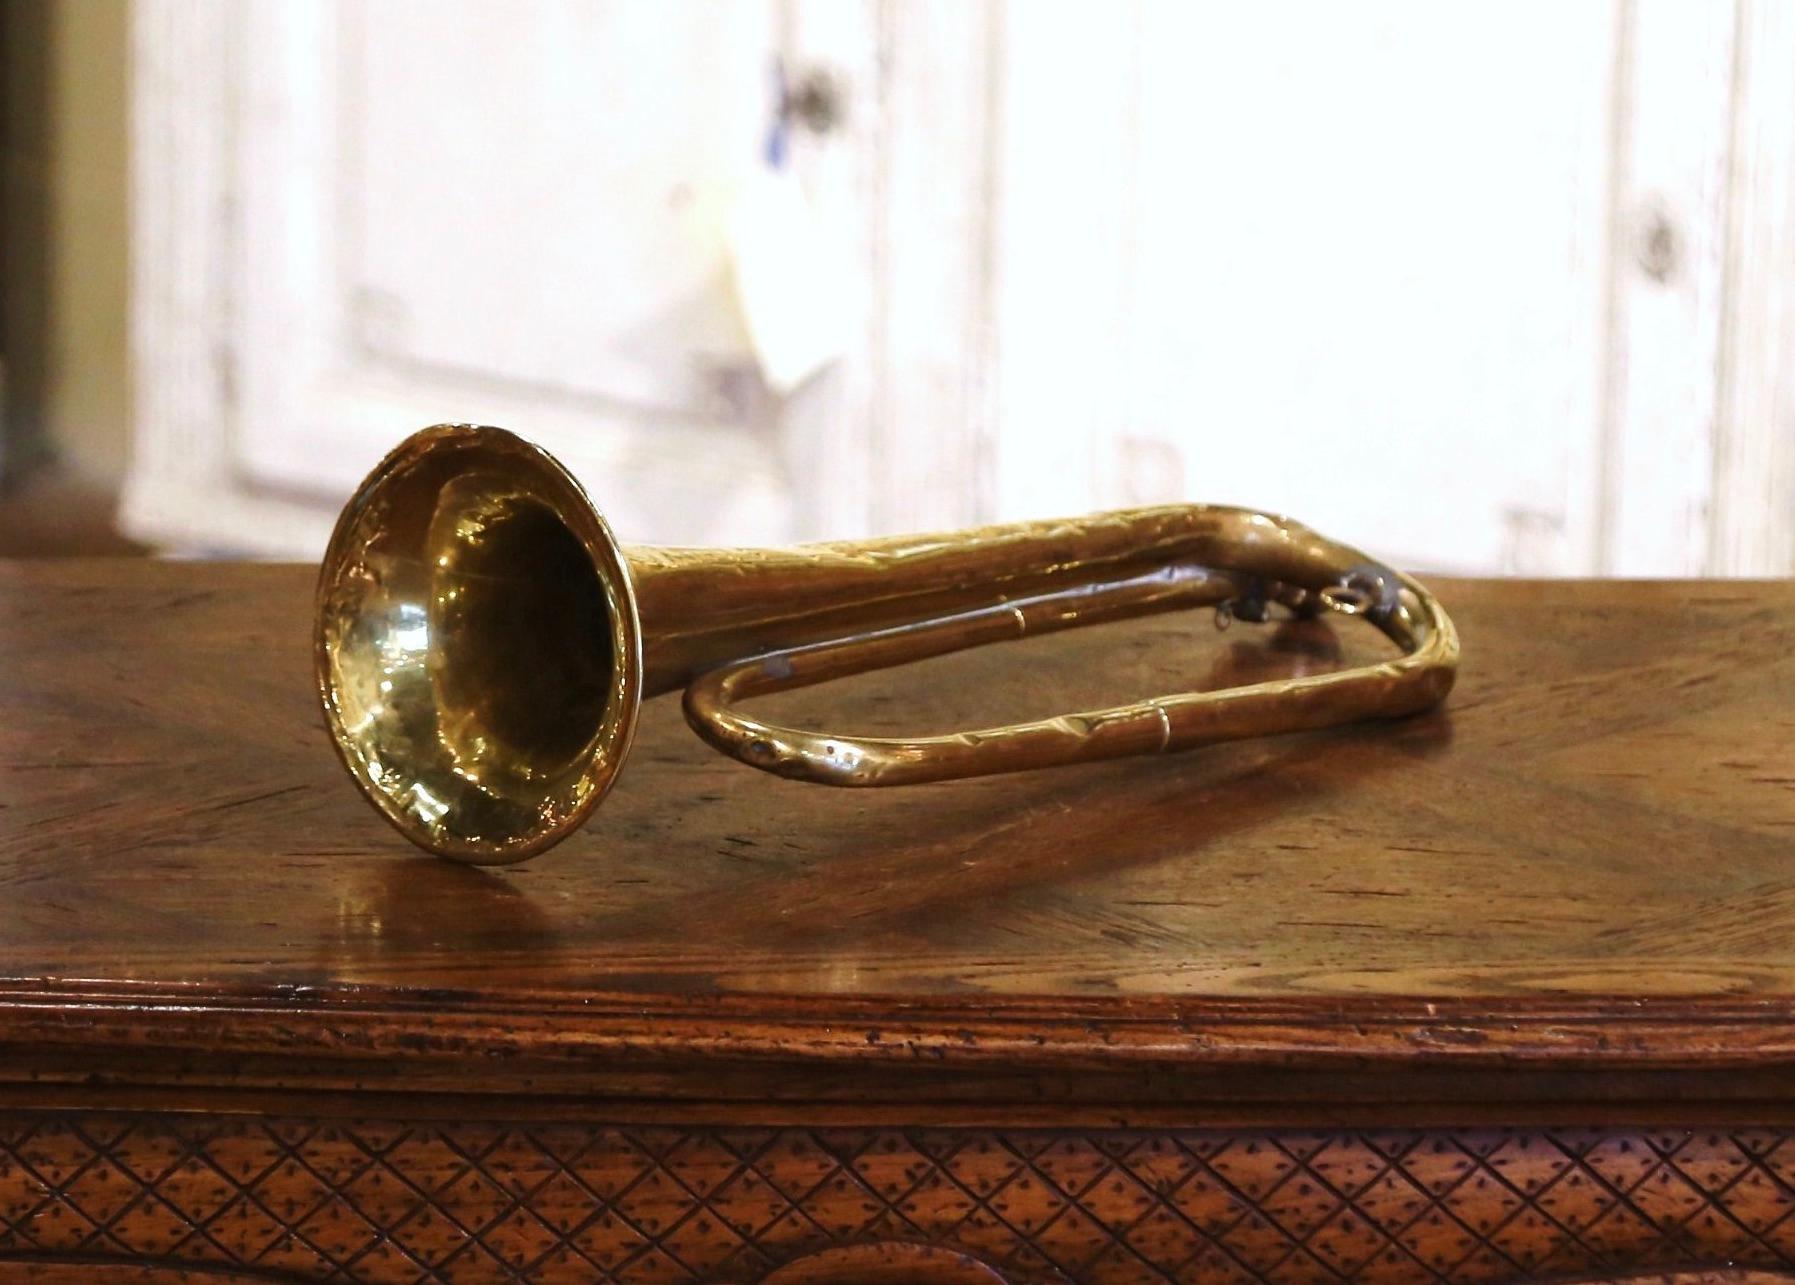 Created in France circa 1920, and built of brass with a silver metal mouthpiece, the horn features a wide end with the following stamp engraving: 